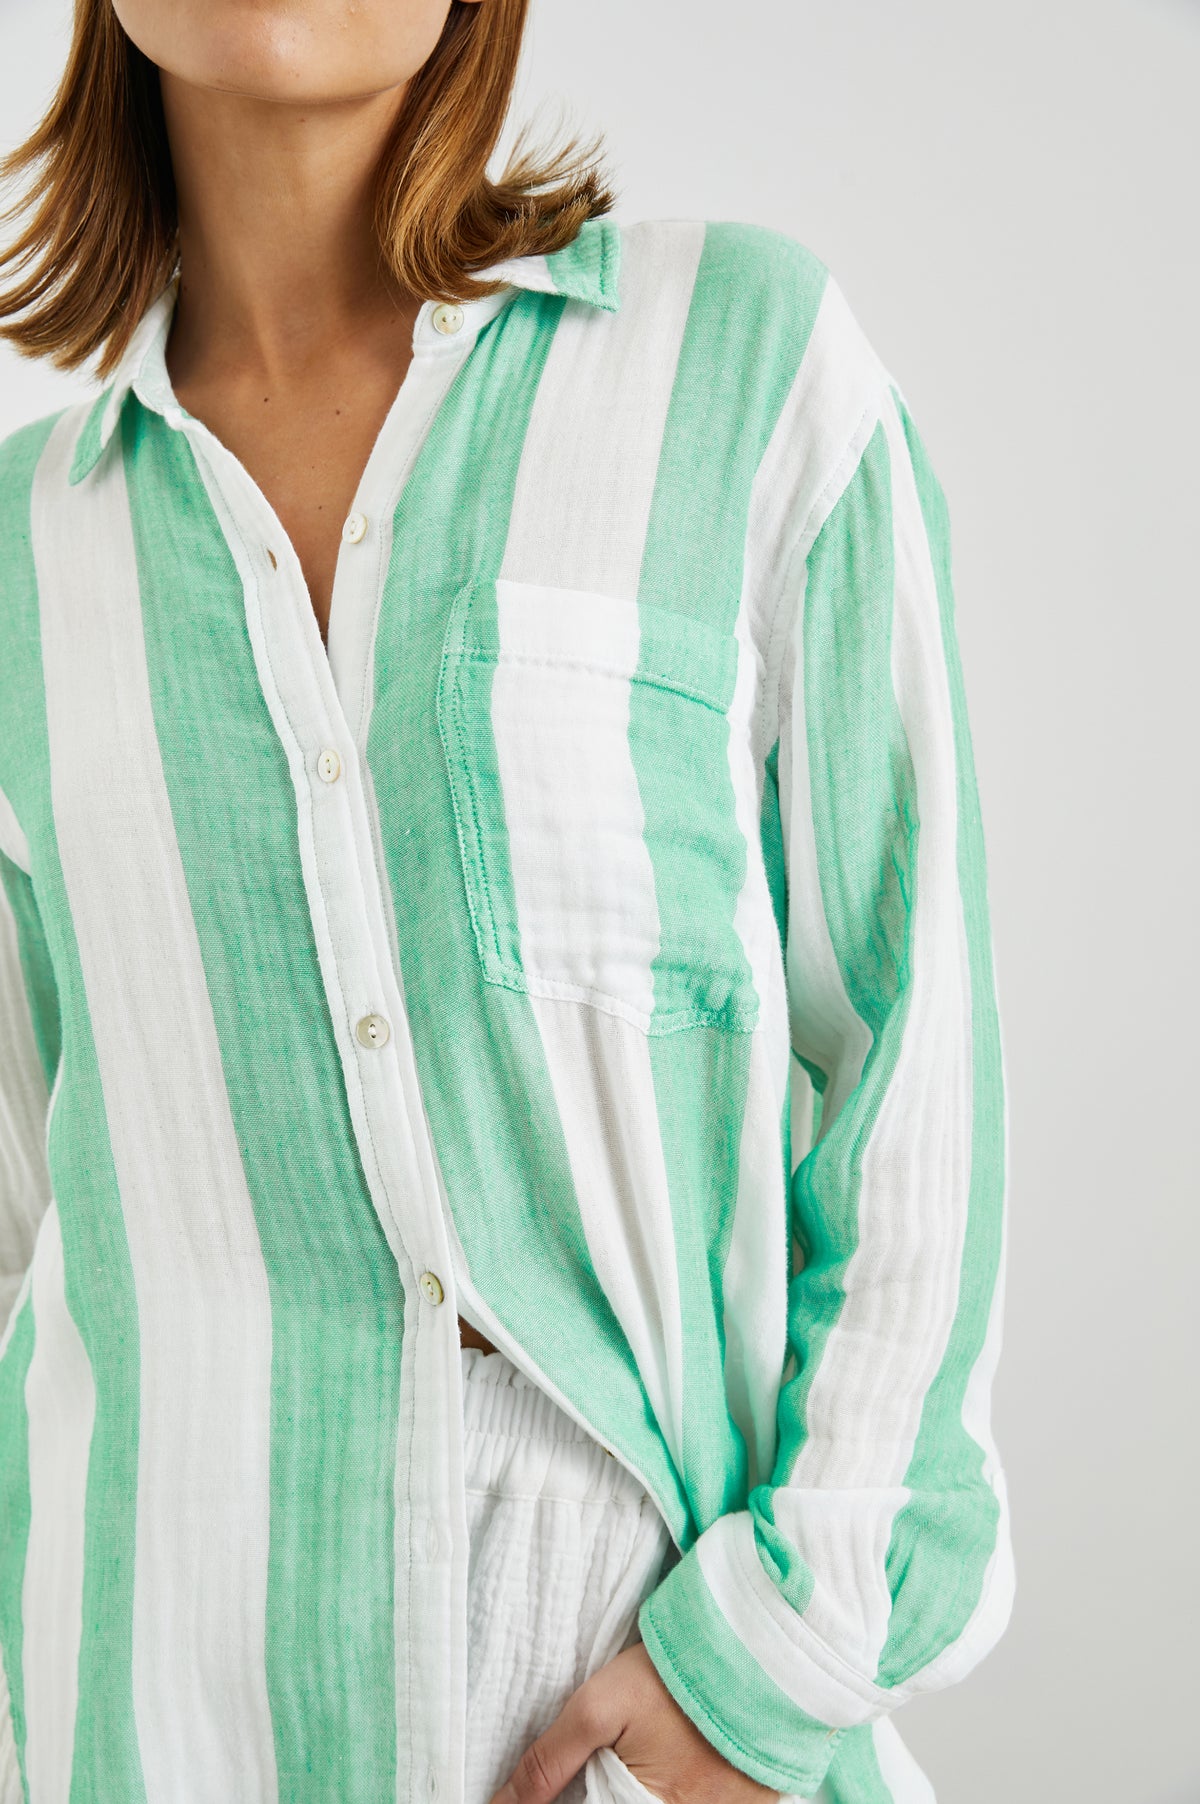 Relaxed 100% cotton muslin shirt with wide white and green stripe